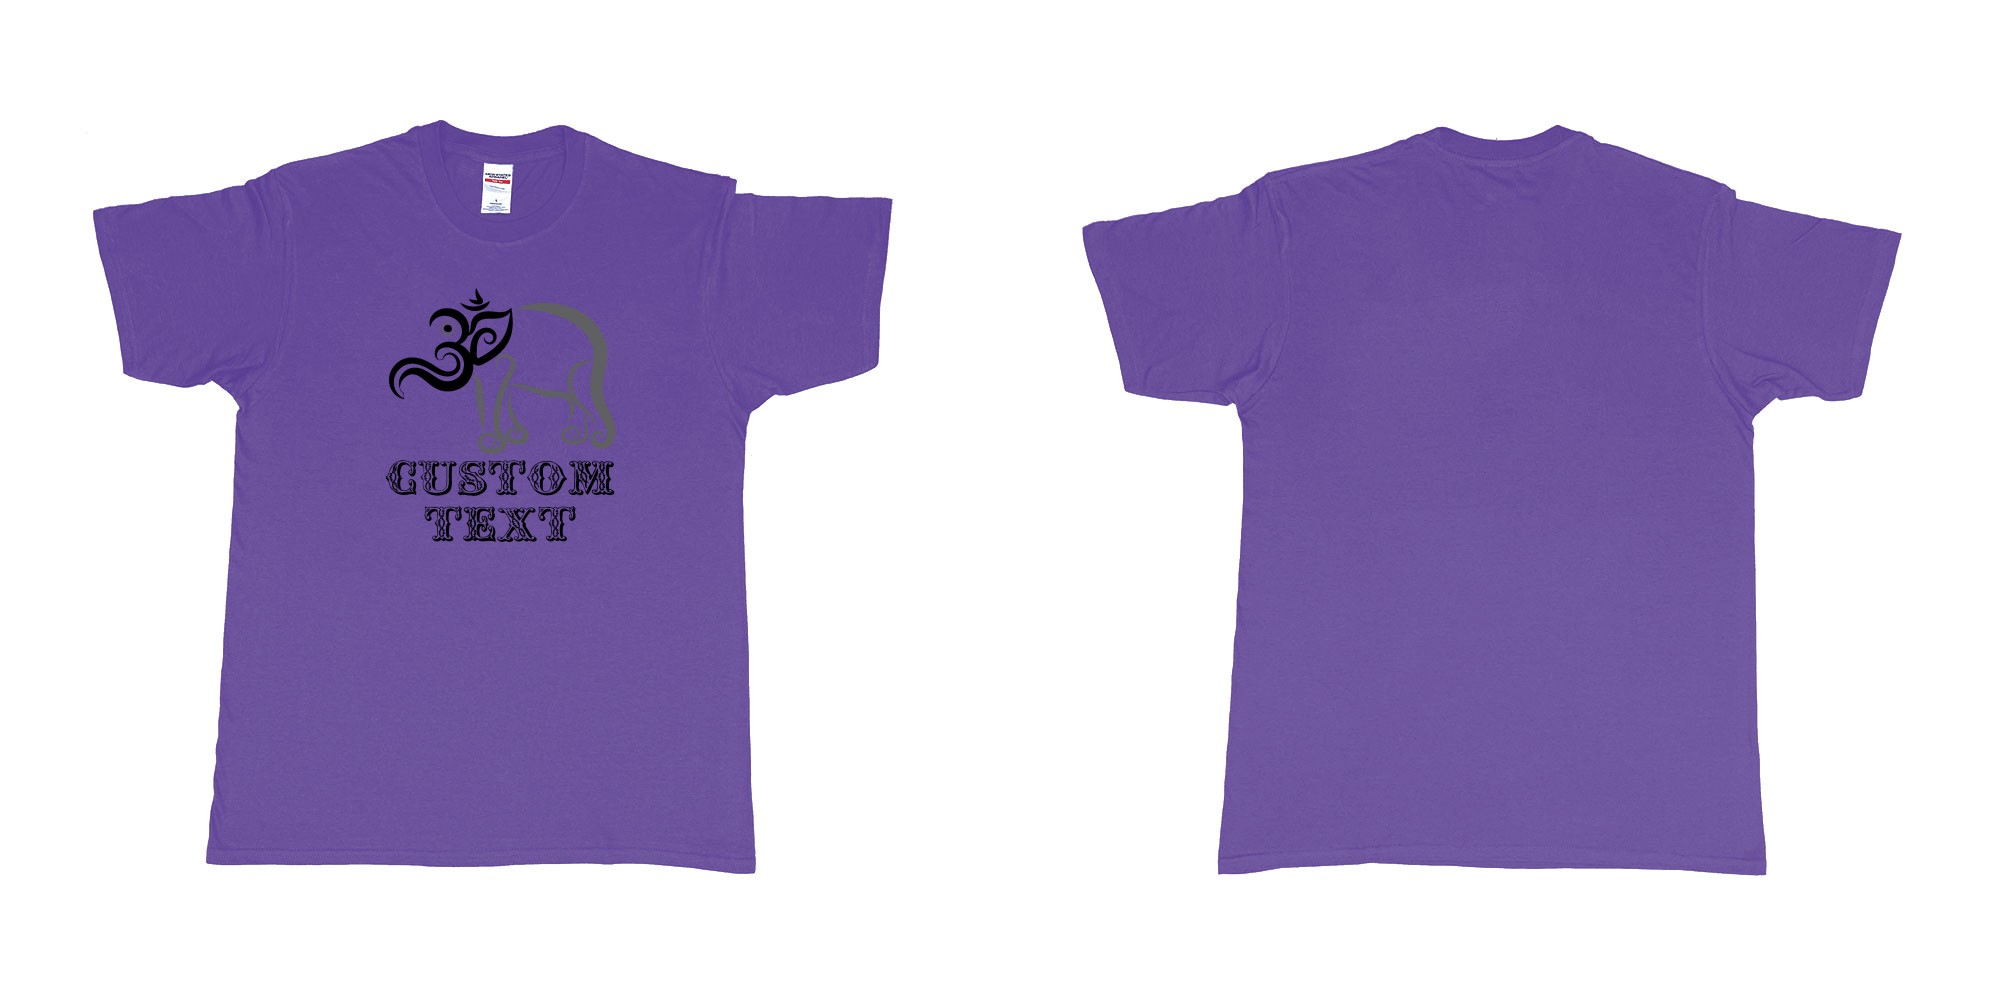 Custom tshirt design om elephant design in fabric color purple choice your own text made in Bali by The Pirate Way